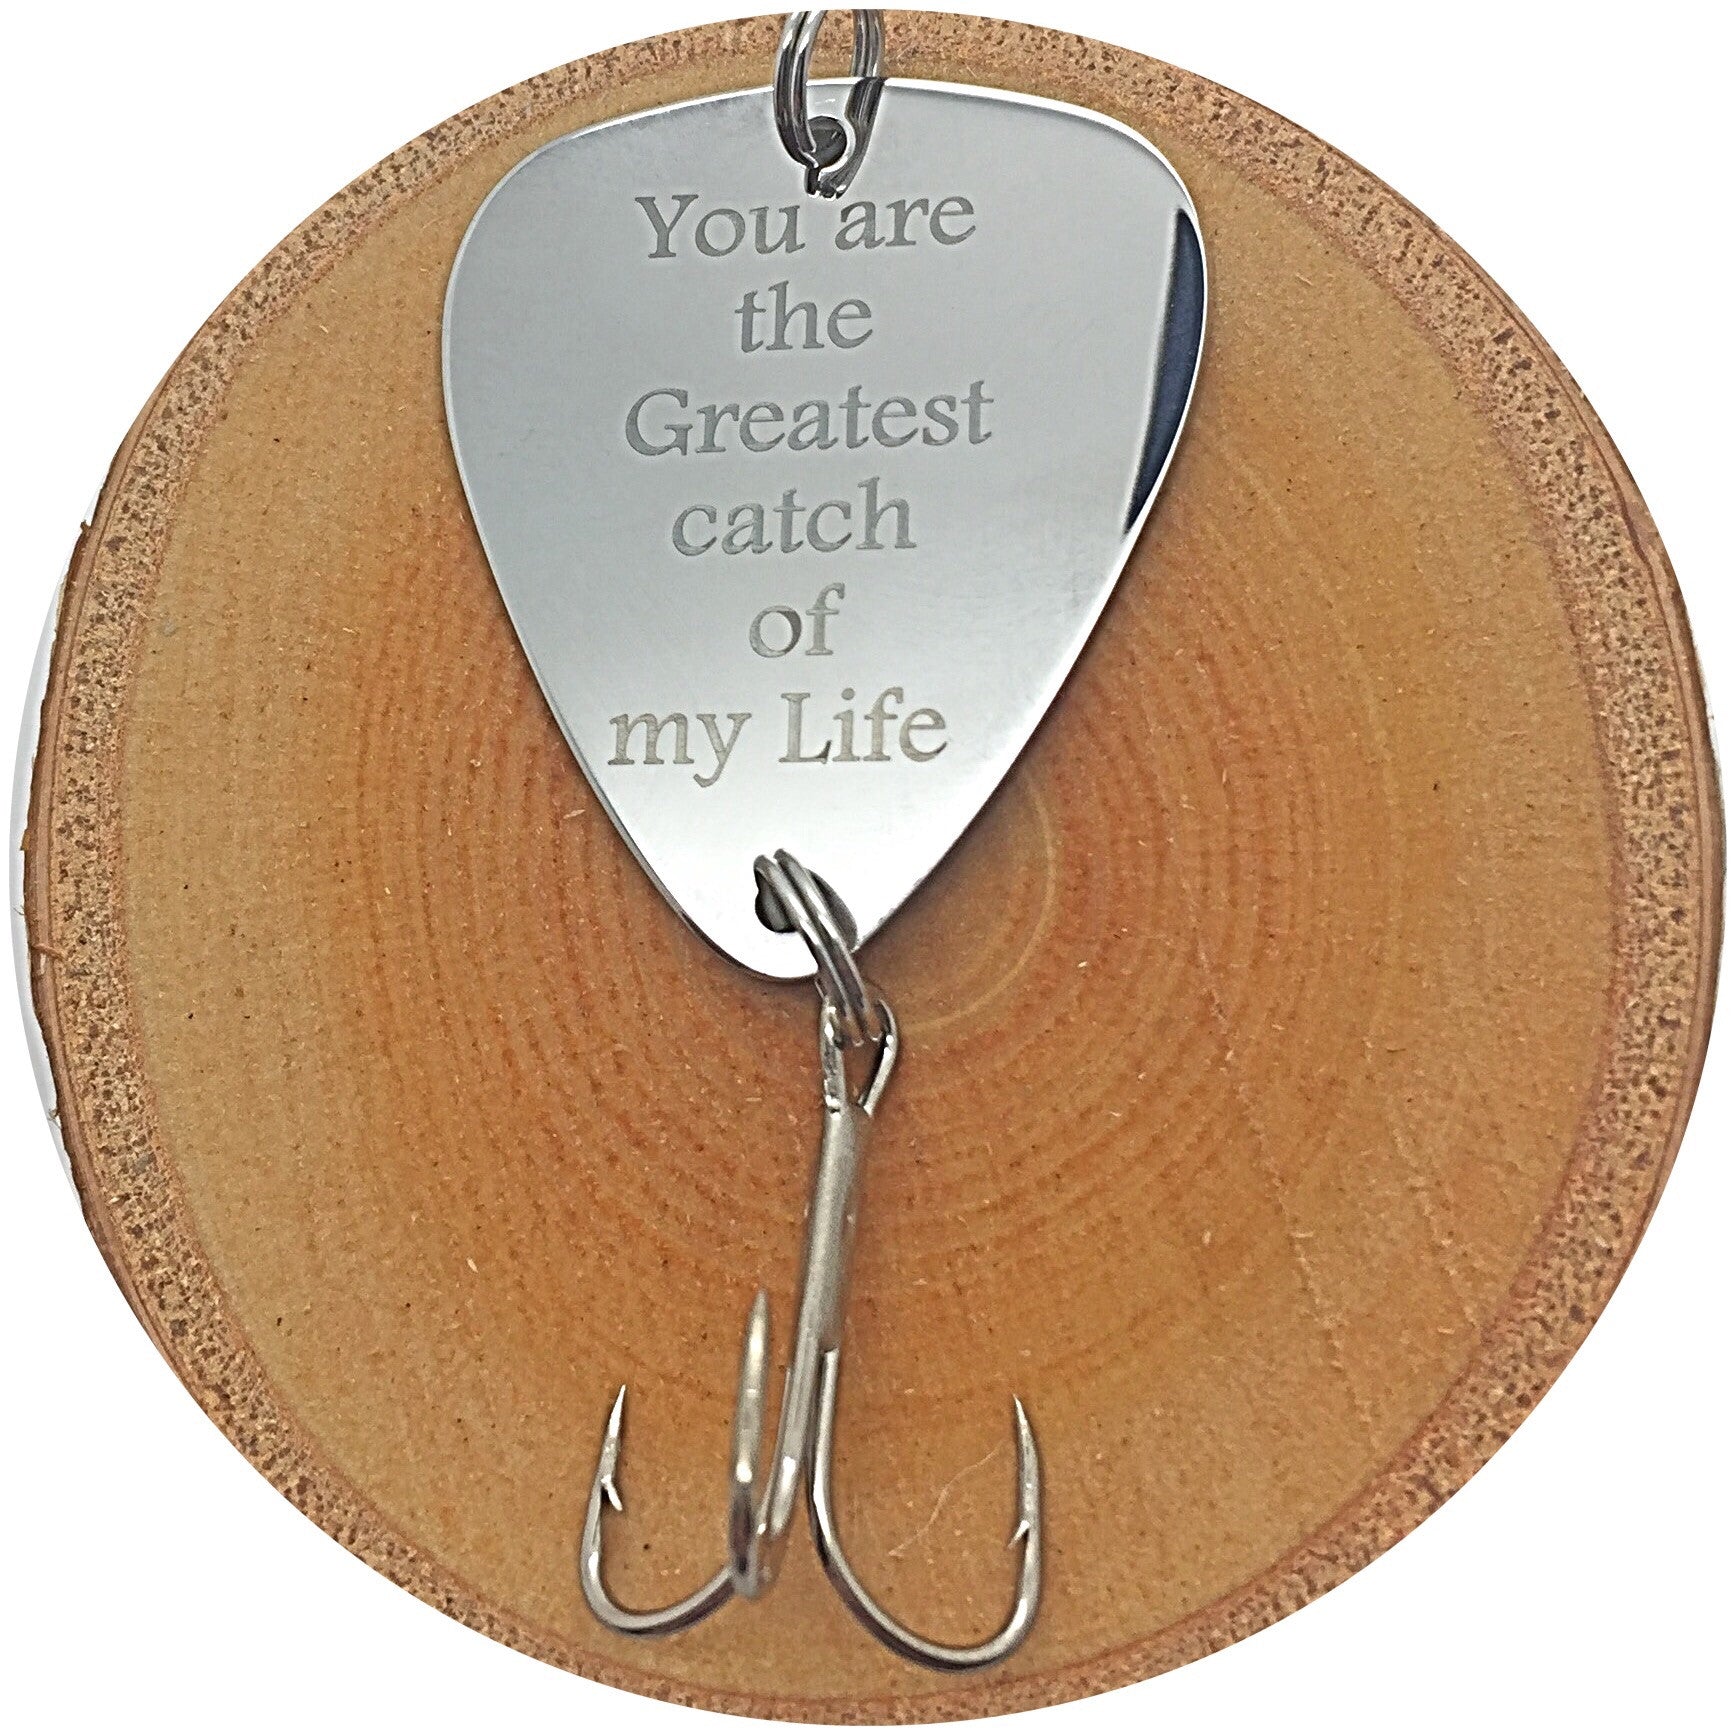 You are the greatest catch of my life - Fishing Lure – Stamps of Love, LLC